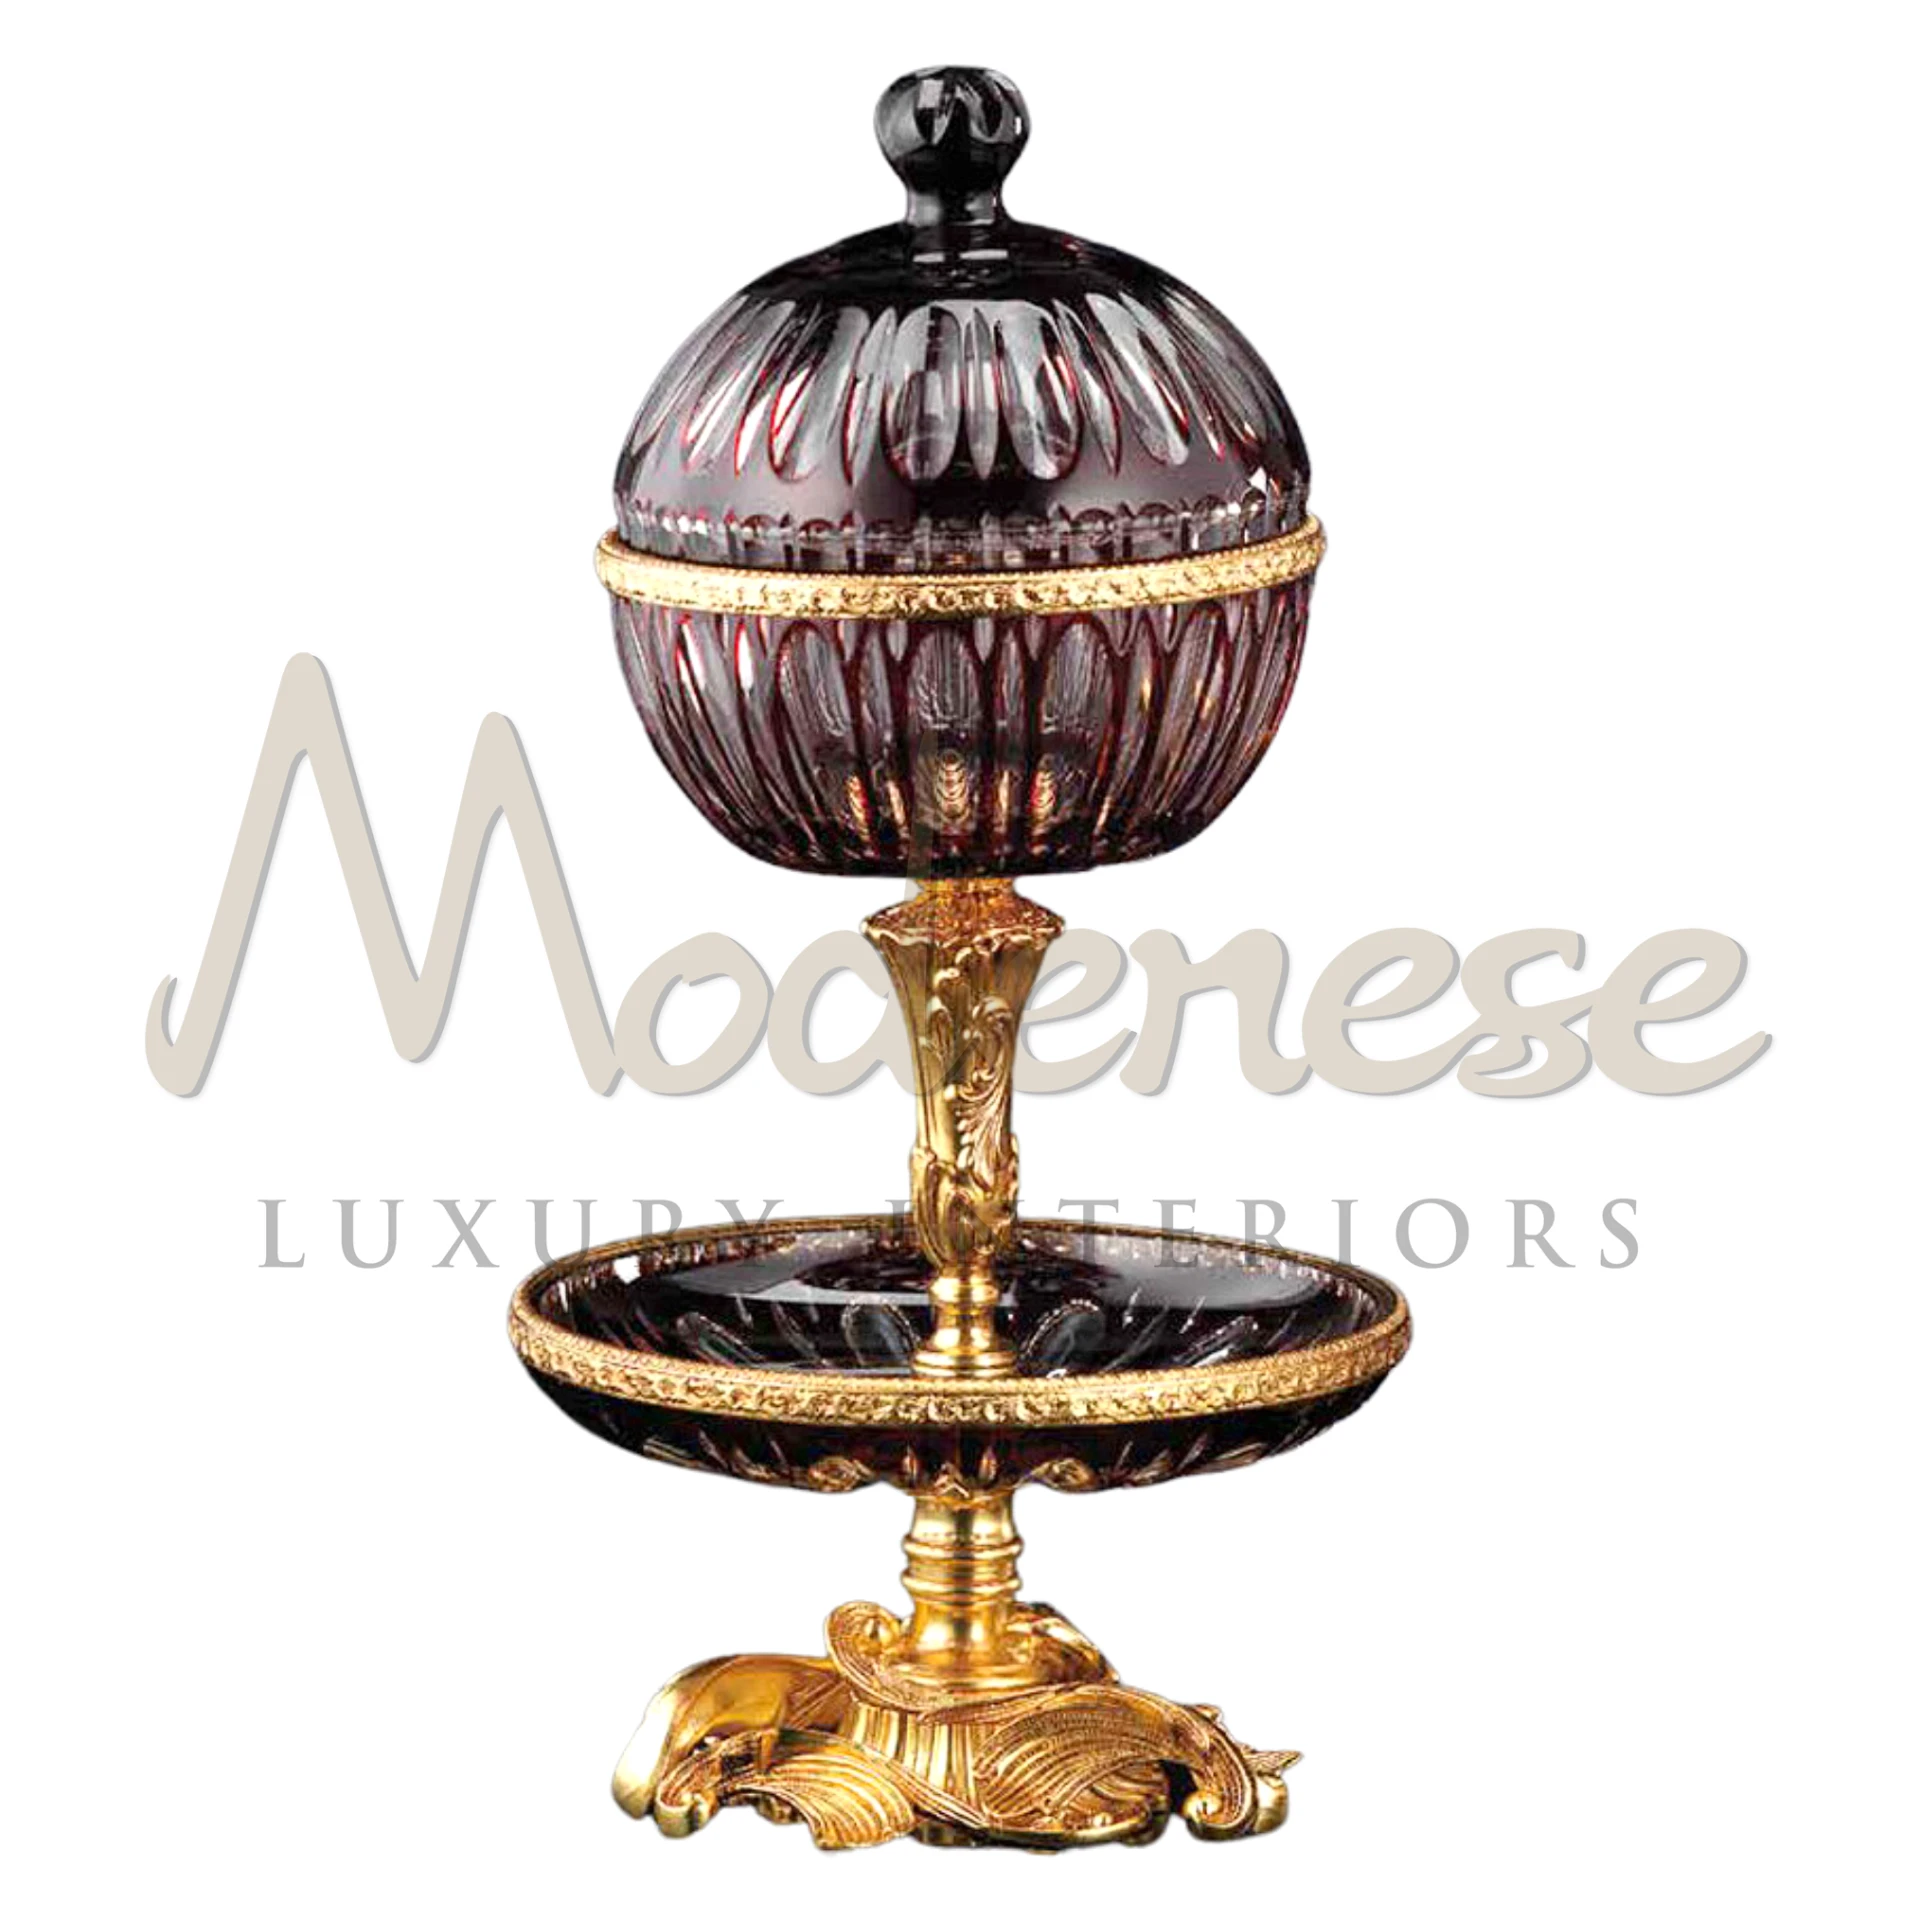 Gorgeous Double Deck Bowl in high-quality glass, featuring intricate designs for a luxurious and stylish interior, blending classic elegance with artistic flair.